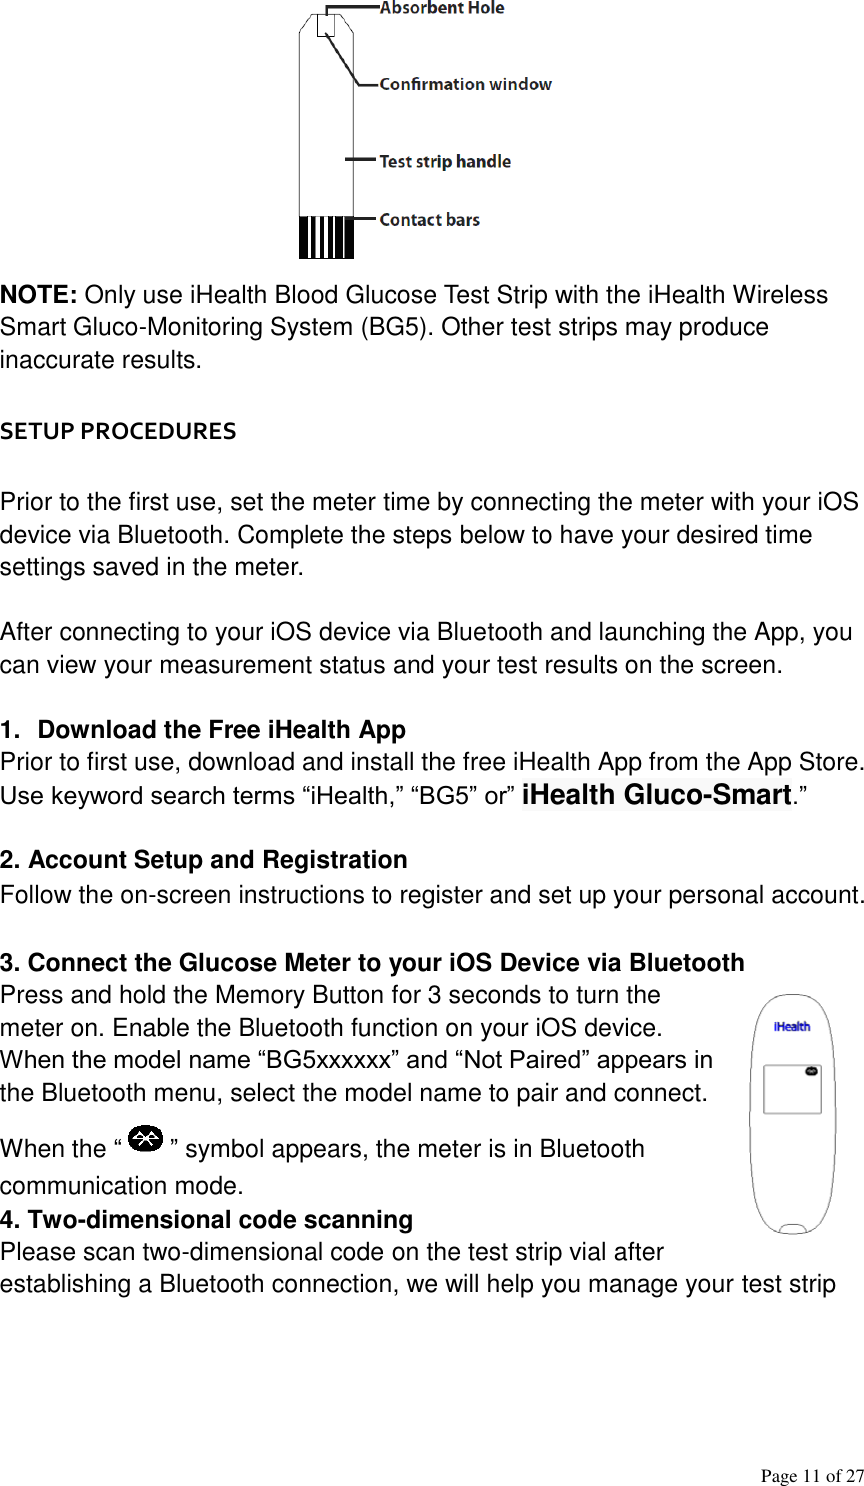 Page 11 of 27      NOTE: Only use iHealth Blood Glucose Test Strip with the iHealth Wireless Smart Gluco-Monitoring System (BG5). Other test strips may produce inaccurate results.   SETUP PROCEDURES   Prior to the first use, set the meter time by connecting the meter with your iOS device via Bluetooth. Complete the steps below to have your desired time settings saved in the meter.   After connecting to your iOS device via Bluetooth and launching the App, you can view your measurement status and your test results on the screen.   1.  Download the Free iHealth App Prior to first use, download and install the free iHealth App from the App Store. Use keyword search terms “iHealth,” “BG5” or” iHealth Gluco-Smart.”   2. Account Setup and Registration Follow the on-screen instructions to register and set up your personal account.   3. Connect the Glucose Meter to your iOS Device via Bluetooth Press and hold the Memory Button for 3 seconds to turn the meter on. Enable the Bluetooth function on your iOS device. When the model name “BG5xxxxxx” and “Not Paired” appears in the Bluetooth menu, select the model name to pair and connect. When the “ ” symbol appears, the meter is in Bluetooth communication mode. 4. Two-dimensional code scanning Please scan two-dimensional code on the test strip vial after establishing a Bluetooth connection, we will help you manage your test strip 